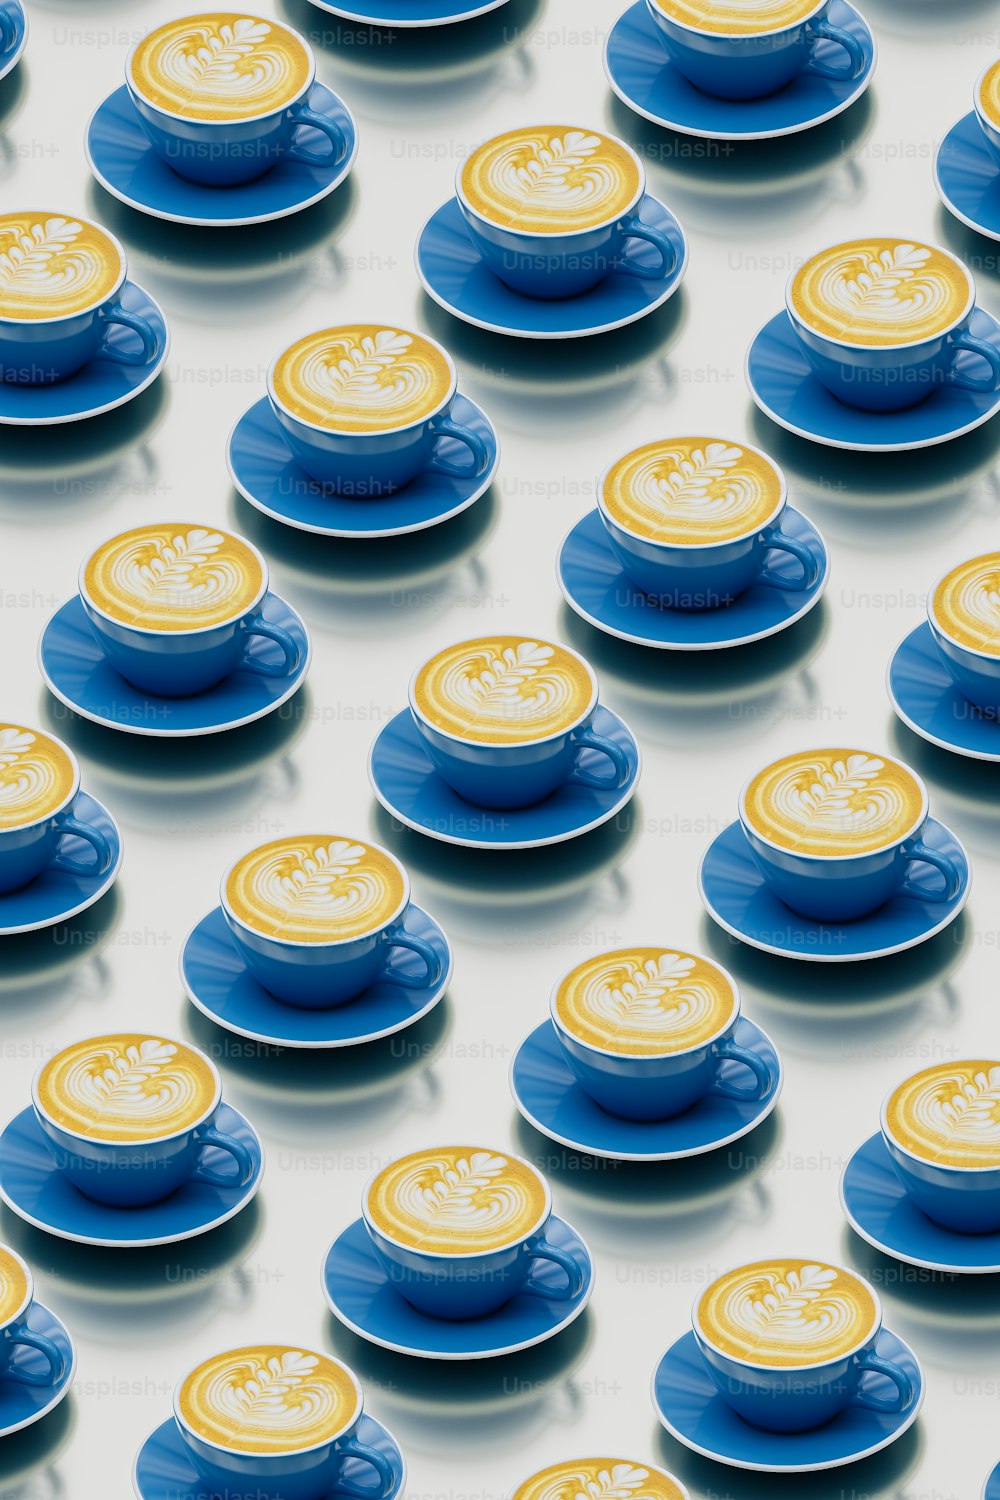 a group of blue and yellow cups and saucers